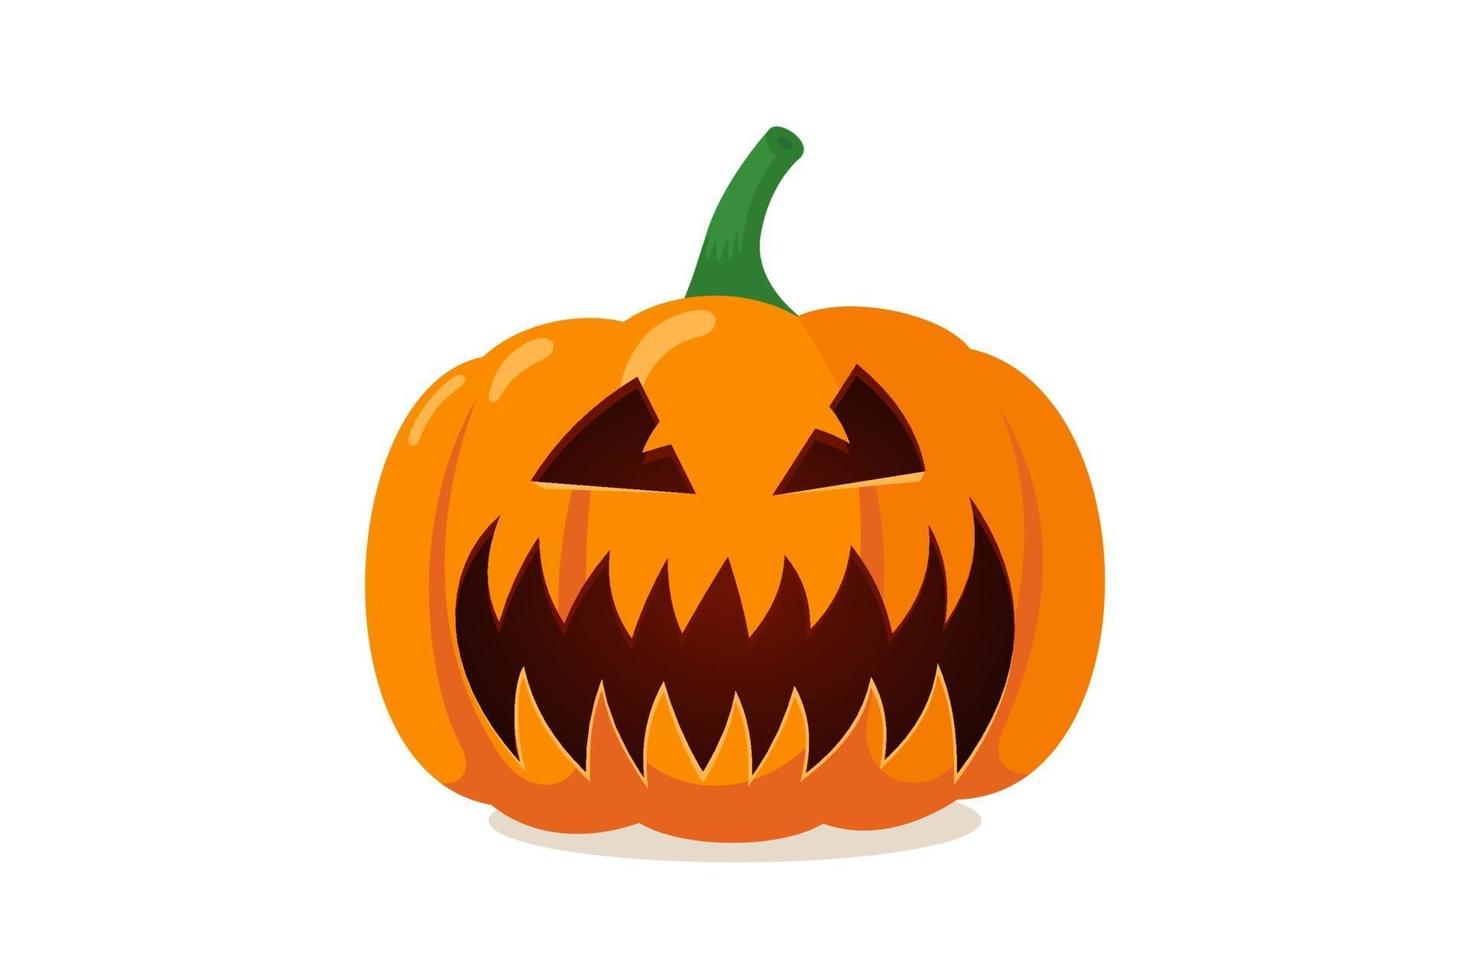 Scary spooky pumpkin jack-o-lantern with creepy toothy smile vector